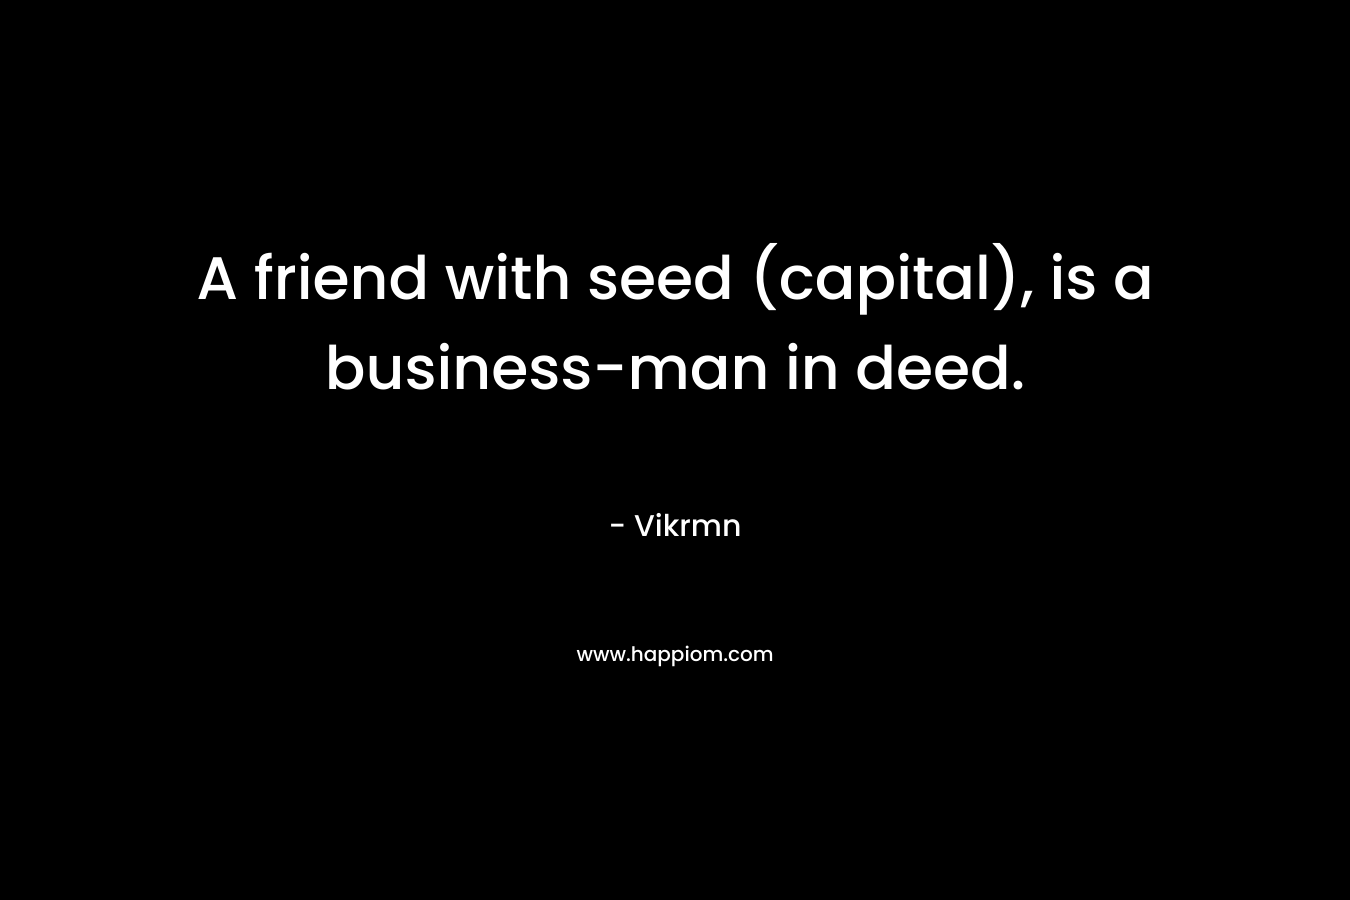 A friend with seed (capital), is a business-man in deed.